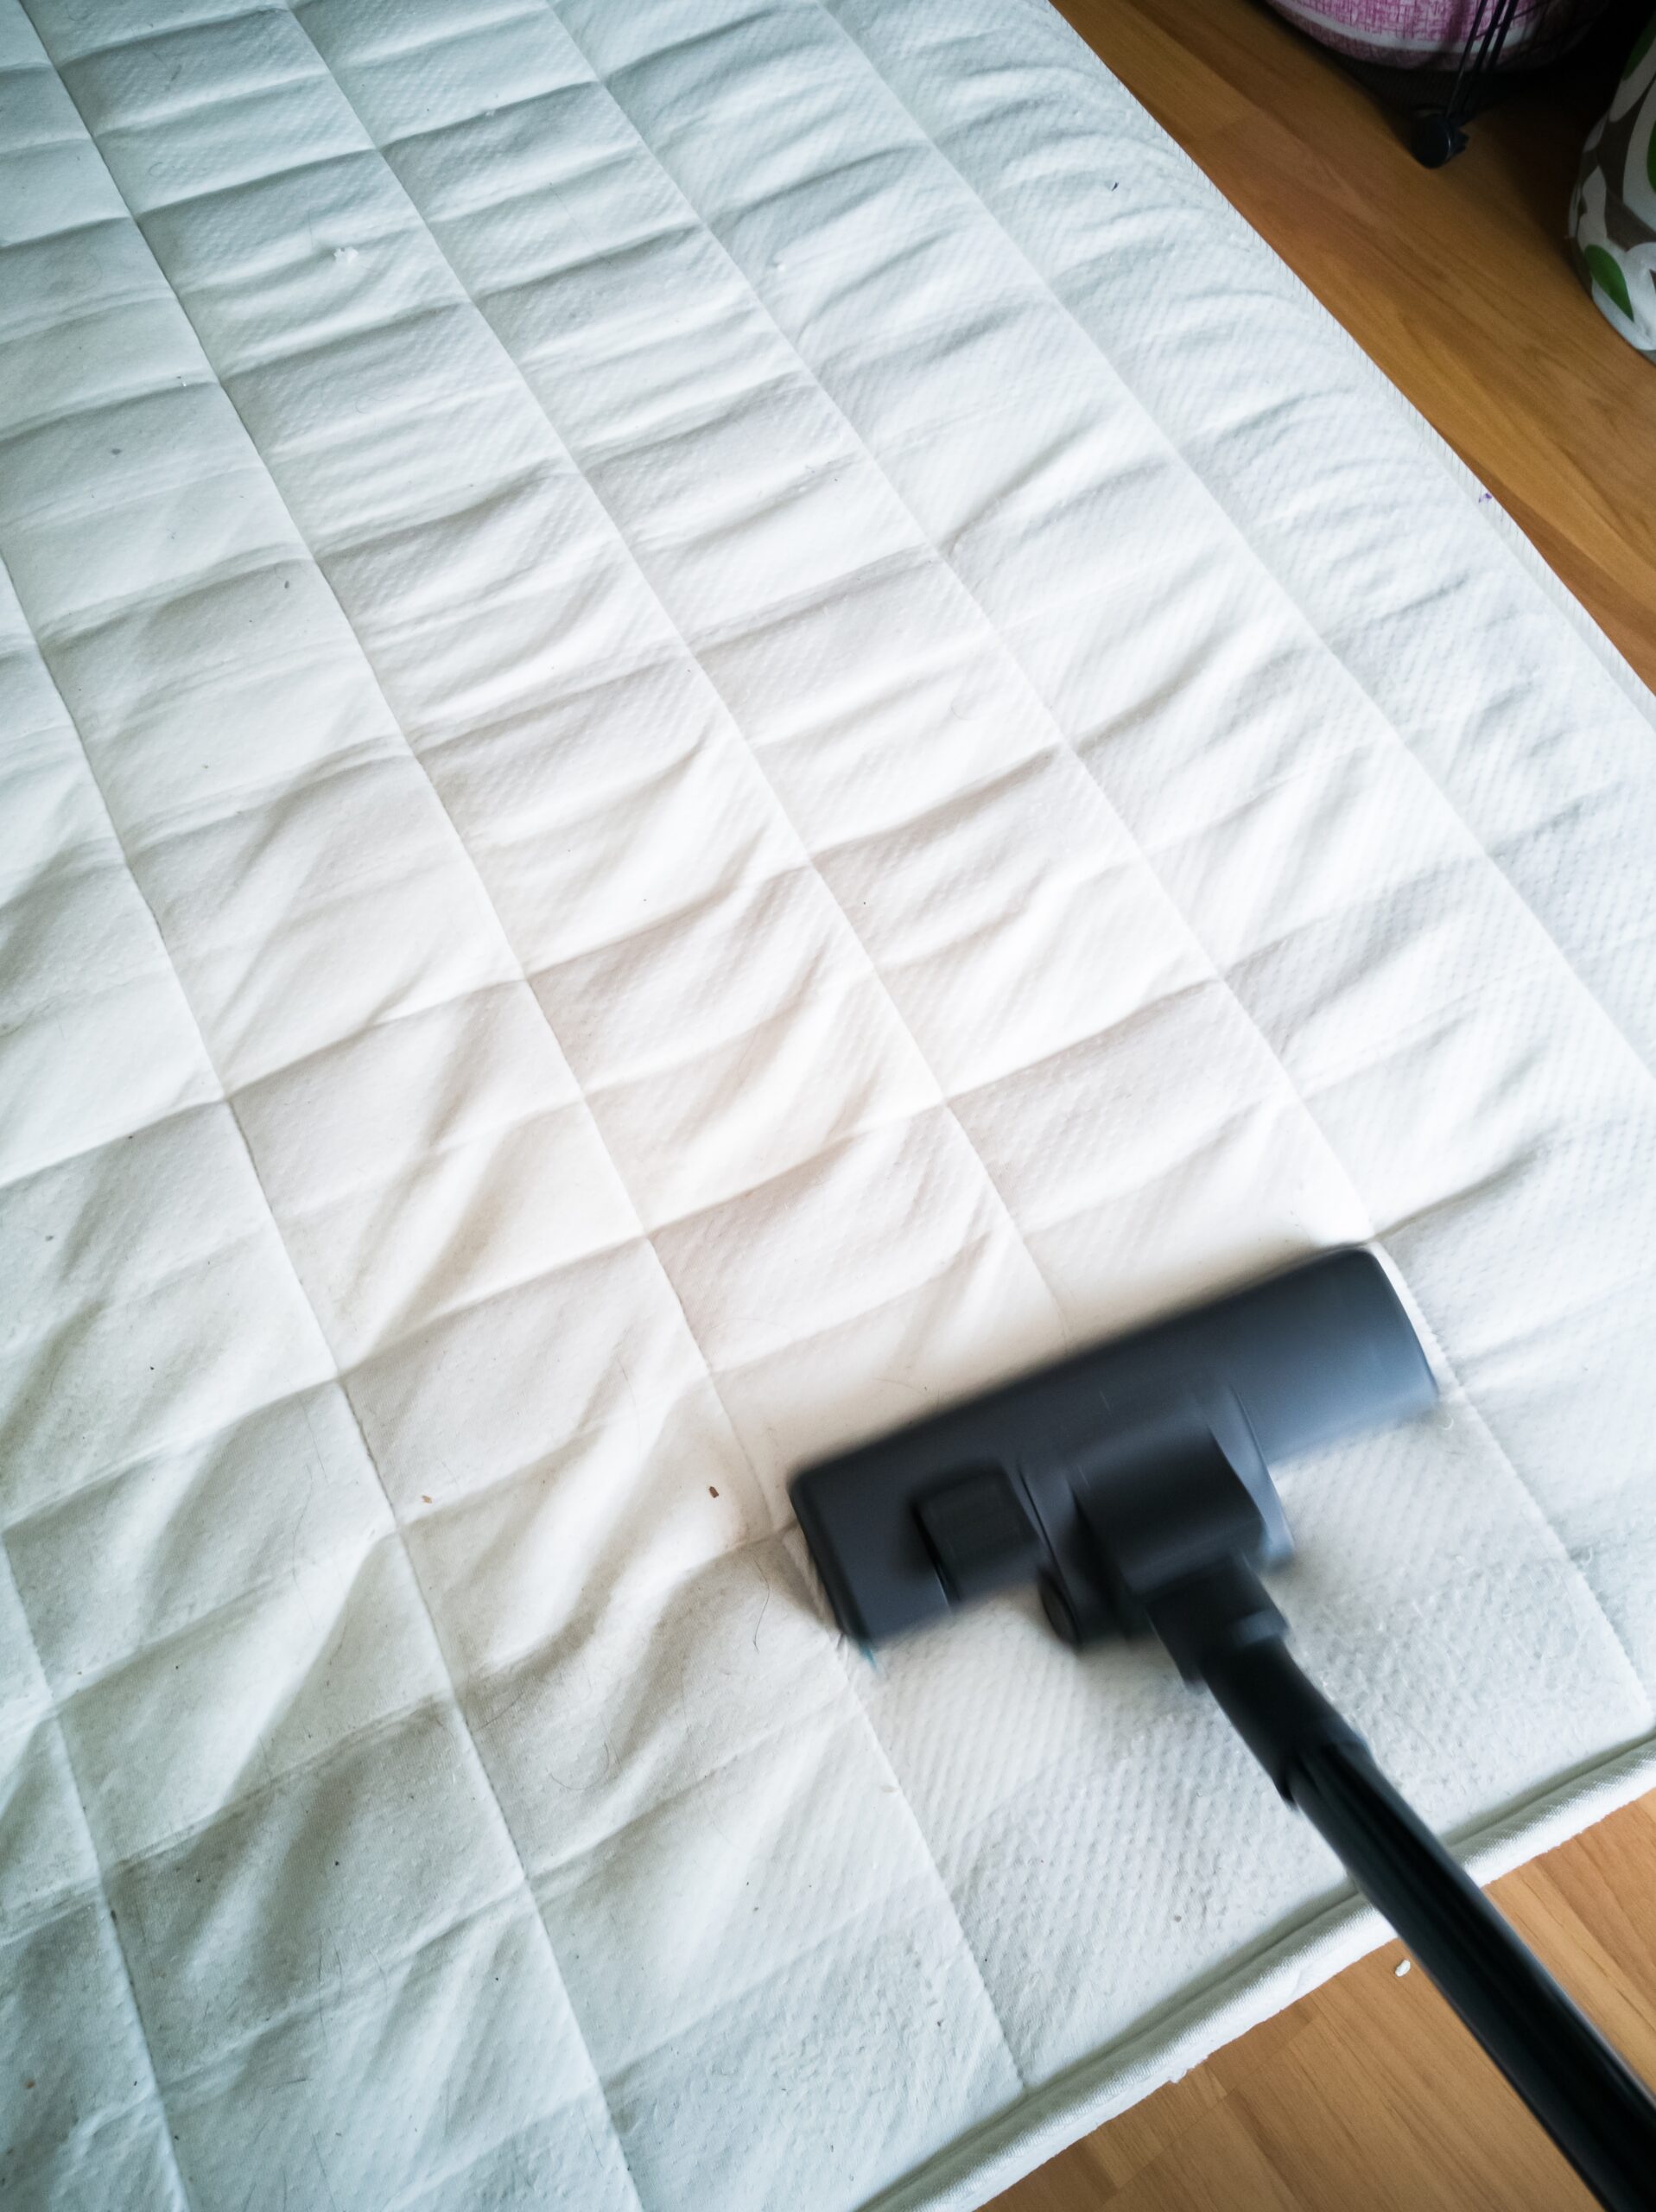 Cleaning the mattress with vacuum cleaner at home.